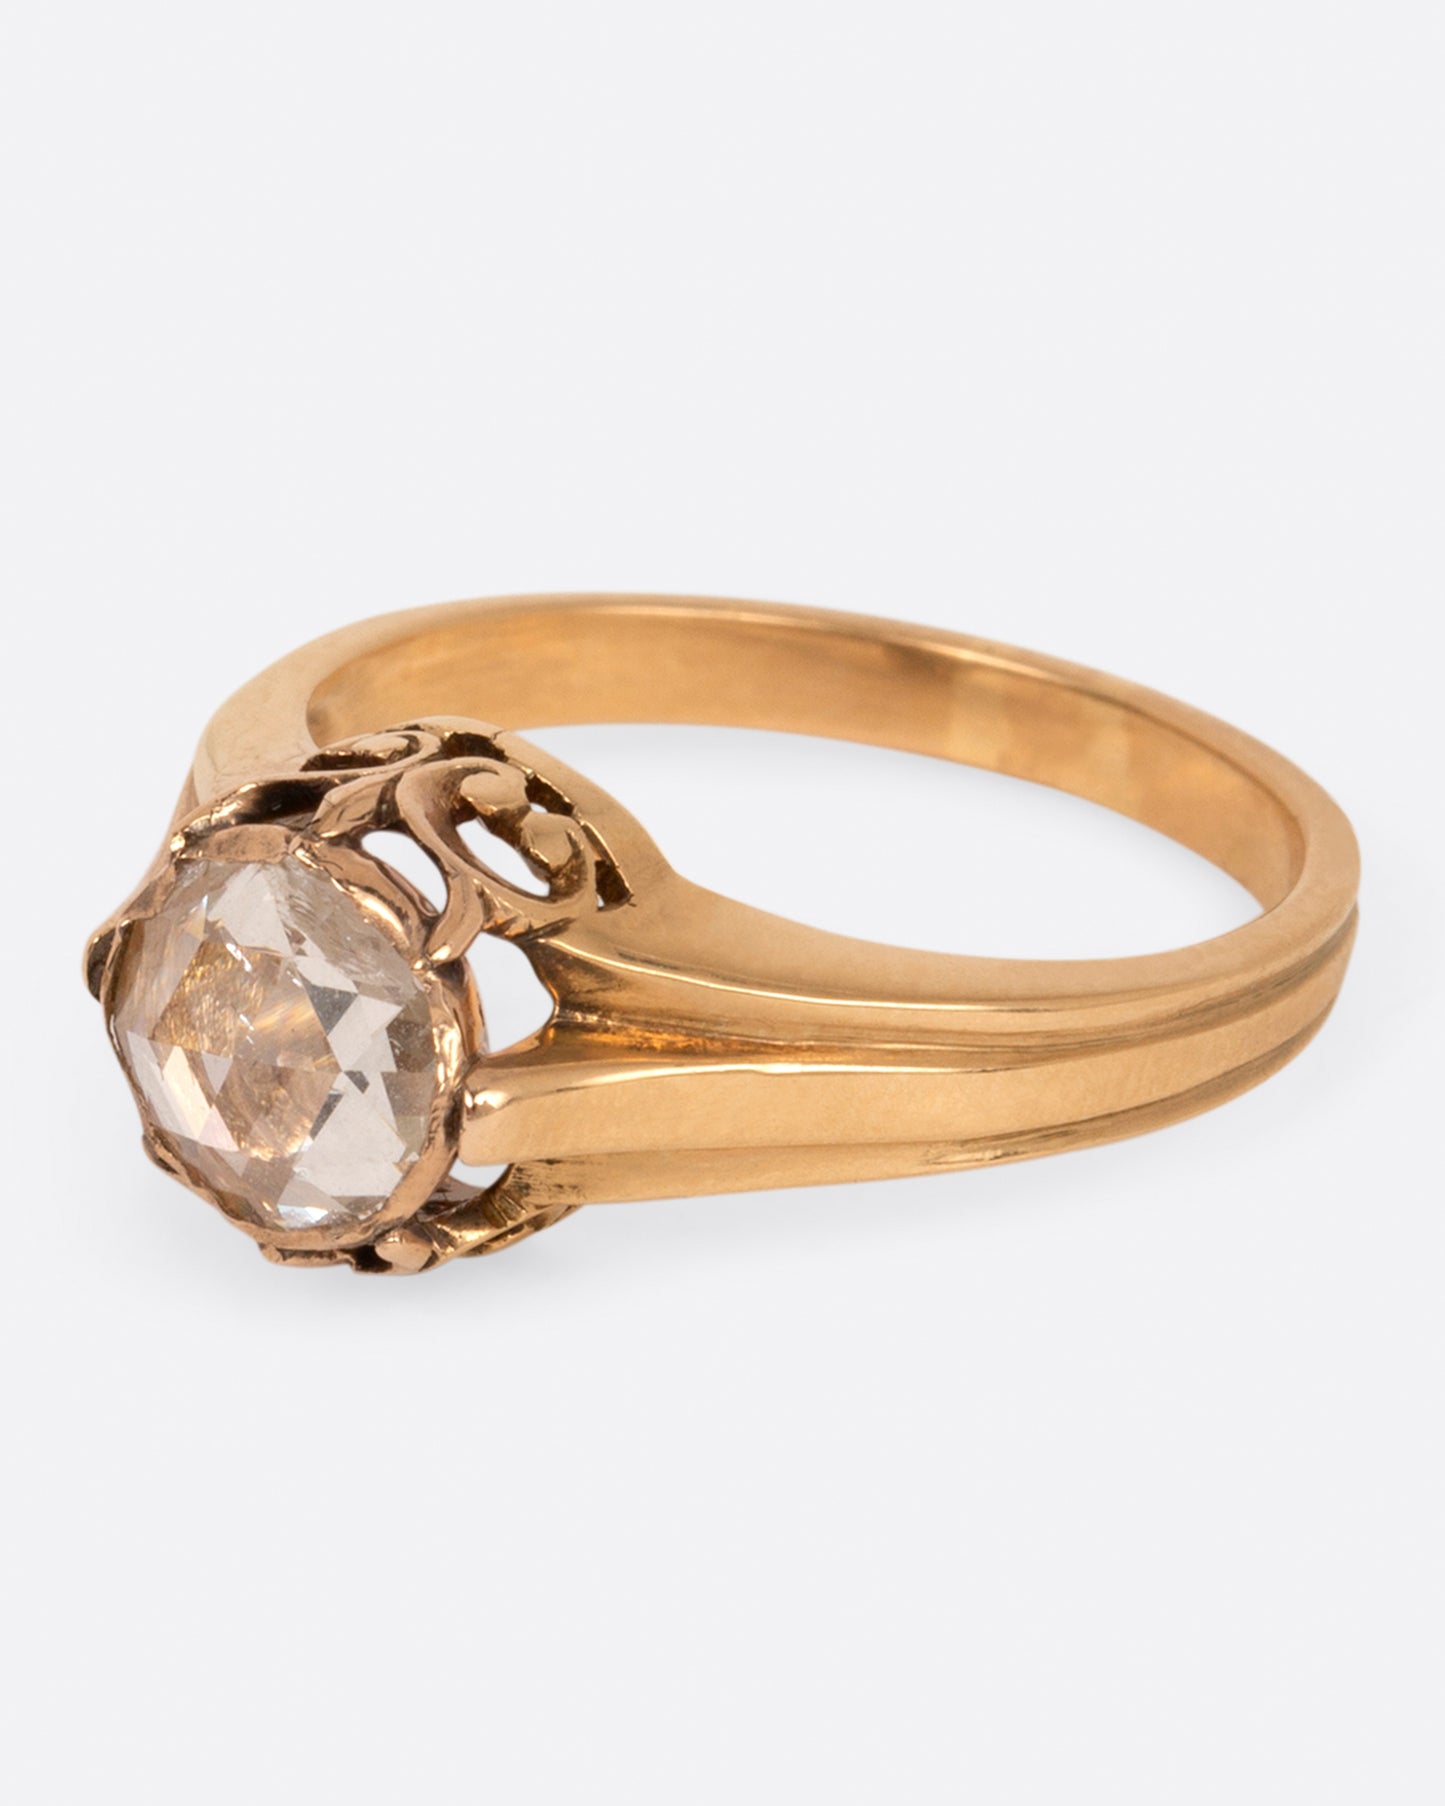 A yellow gold diamond solitaire ring with a rose cut diamond and a ribbed band, shown from the side.